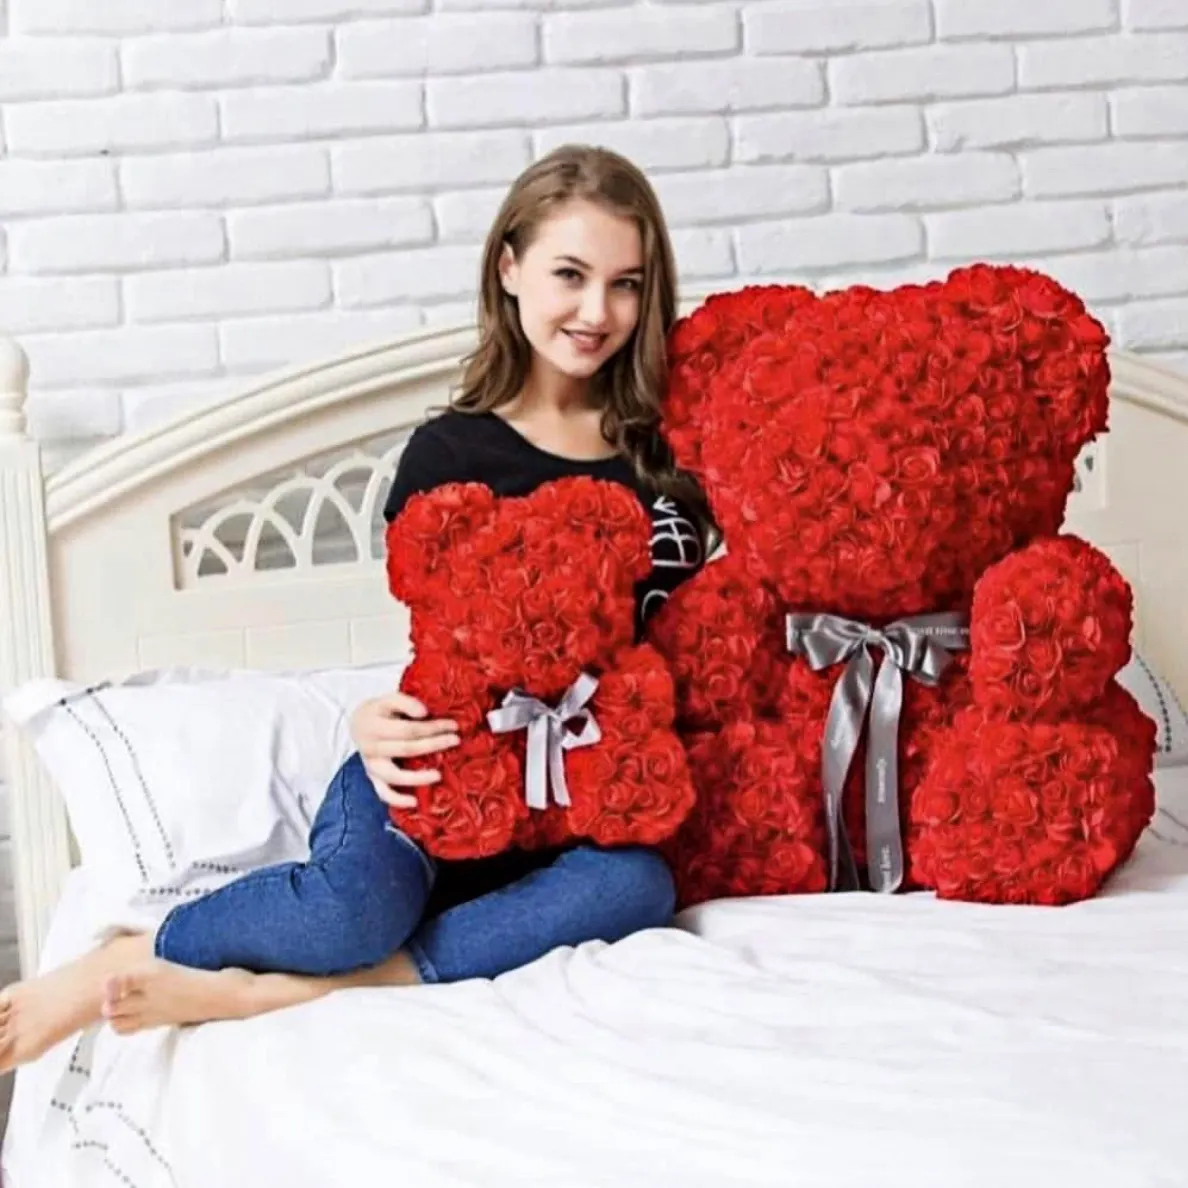 HFlora 25cm Pe Foam Teddy Rose Bear For Valentines Day Hot Sale Artificial Rose Flowers Bears With Box Gift 40Cm Customizable